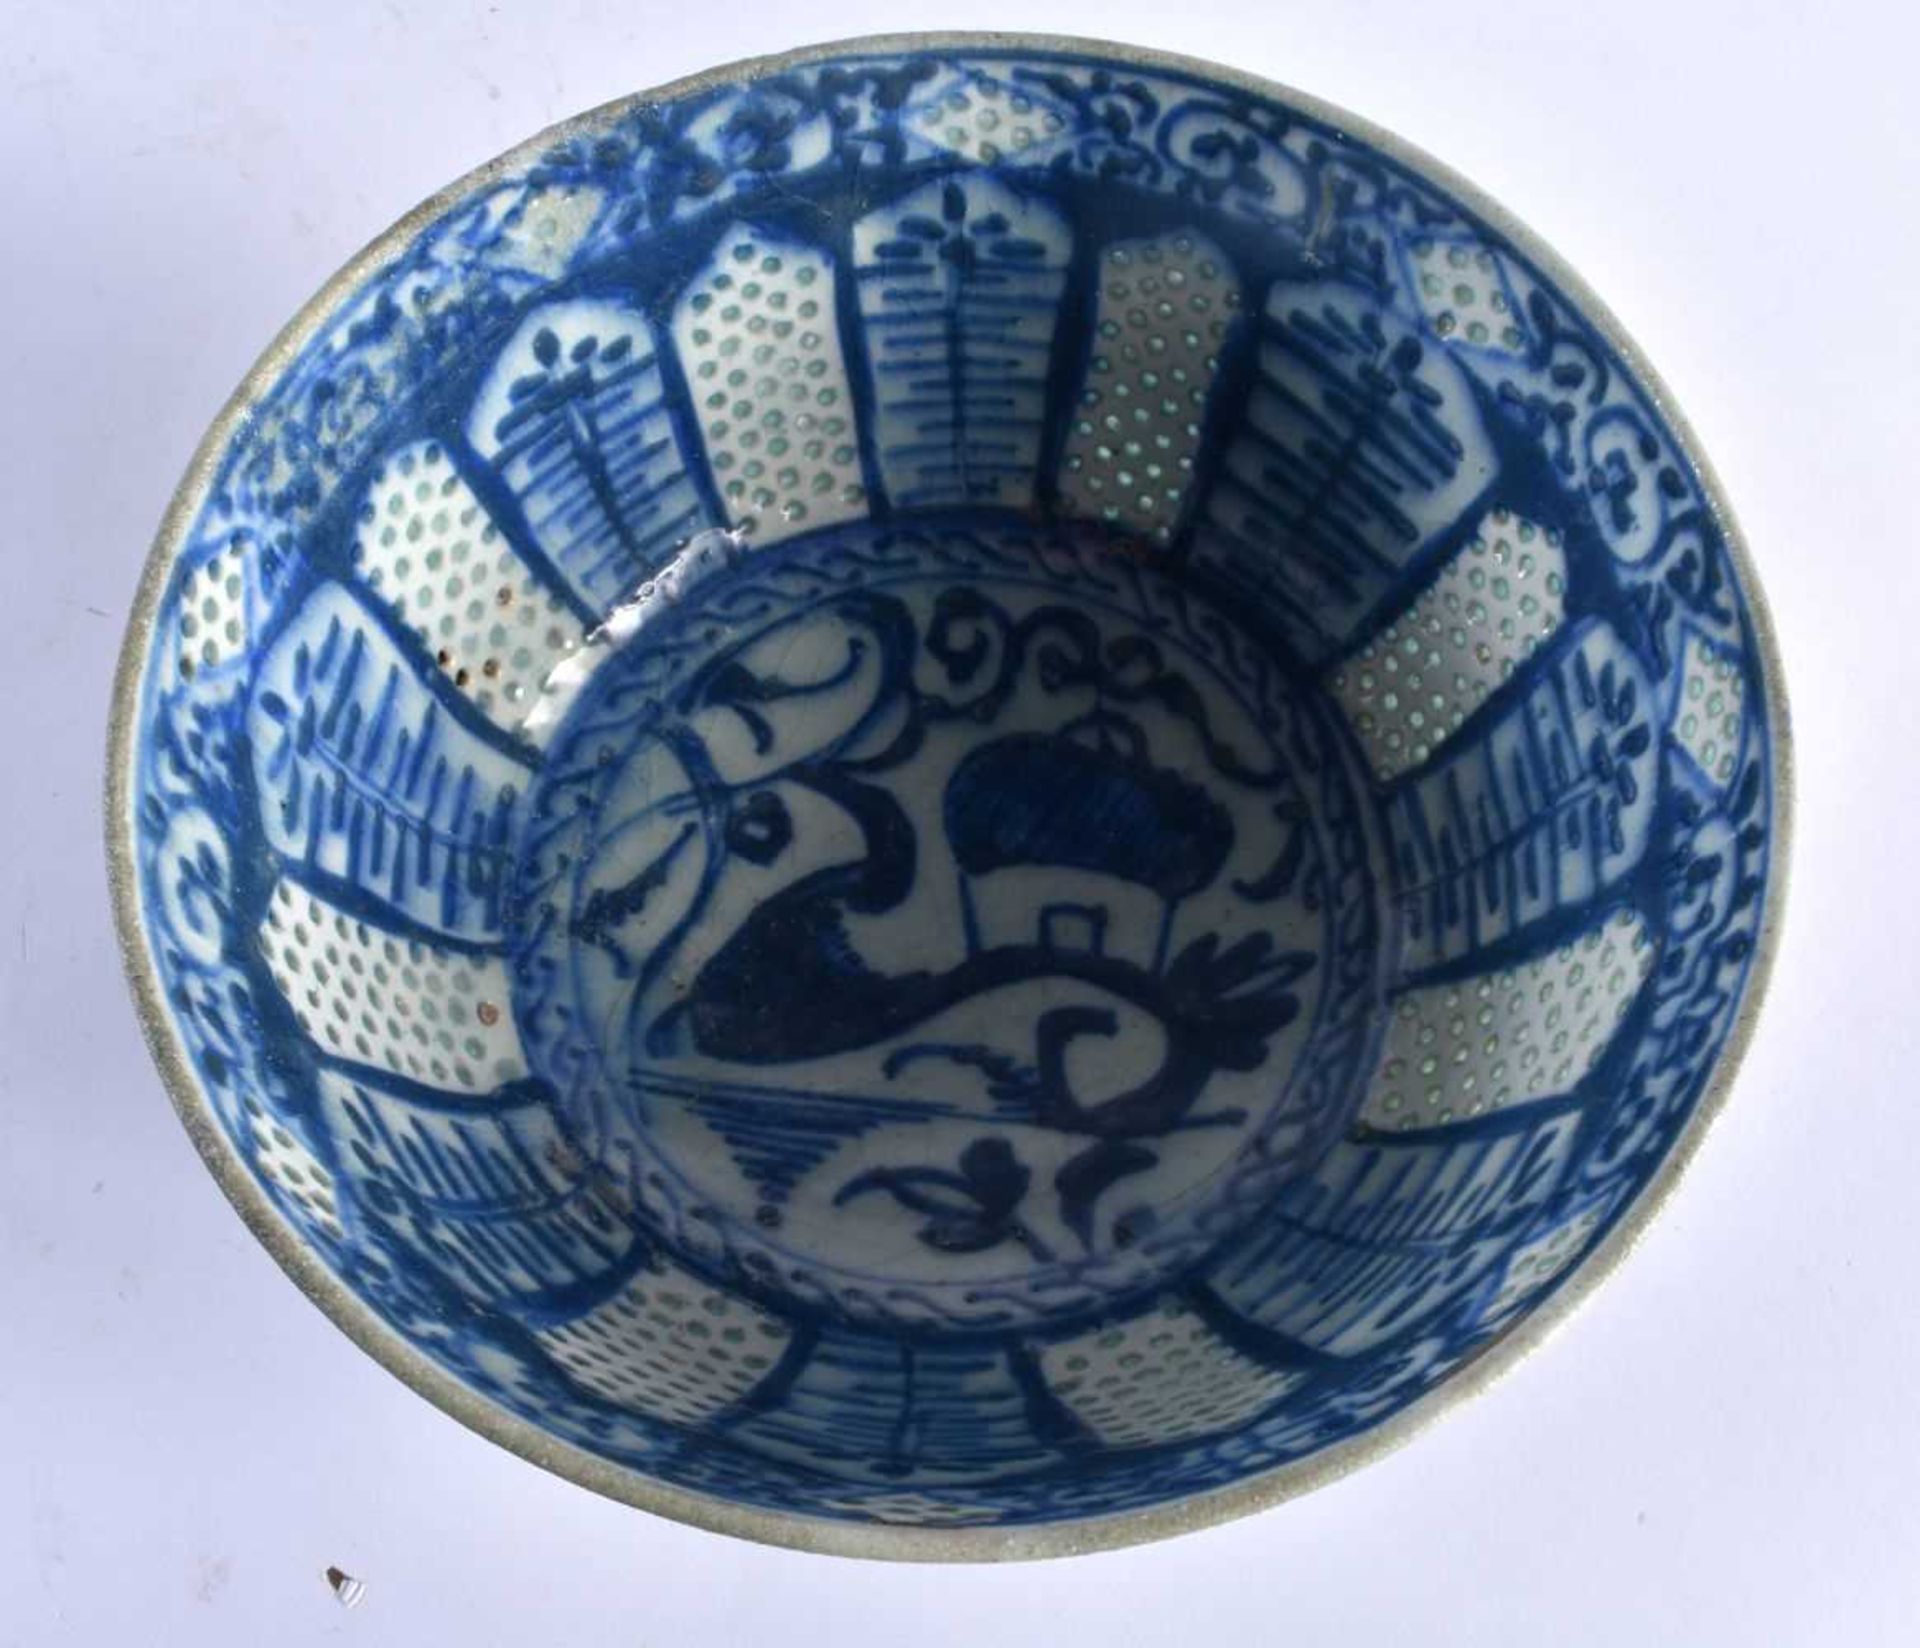 A 17TH/18TH CENTURY PERSIAN ISLAMIC BLUE AND WHITE POTTERY SAFAVID BOWL. 17 cm x 10 cm. - Image 3 of 4